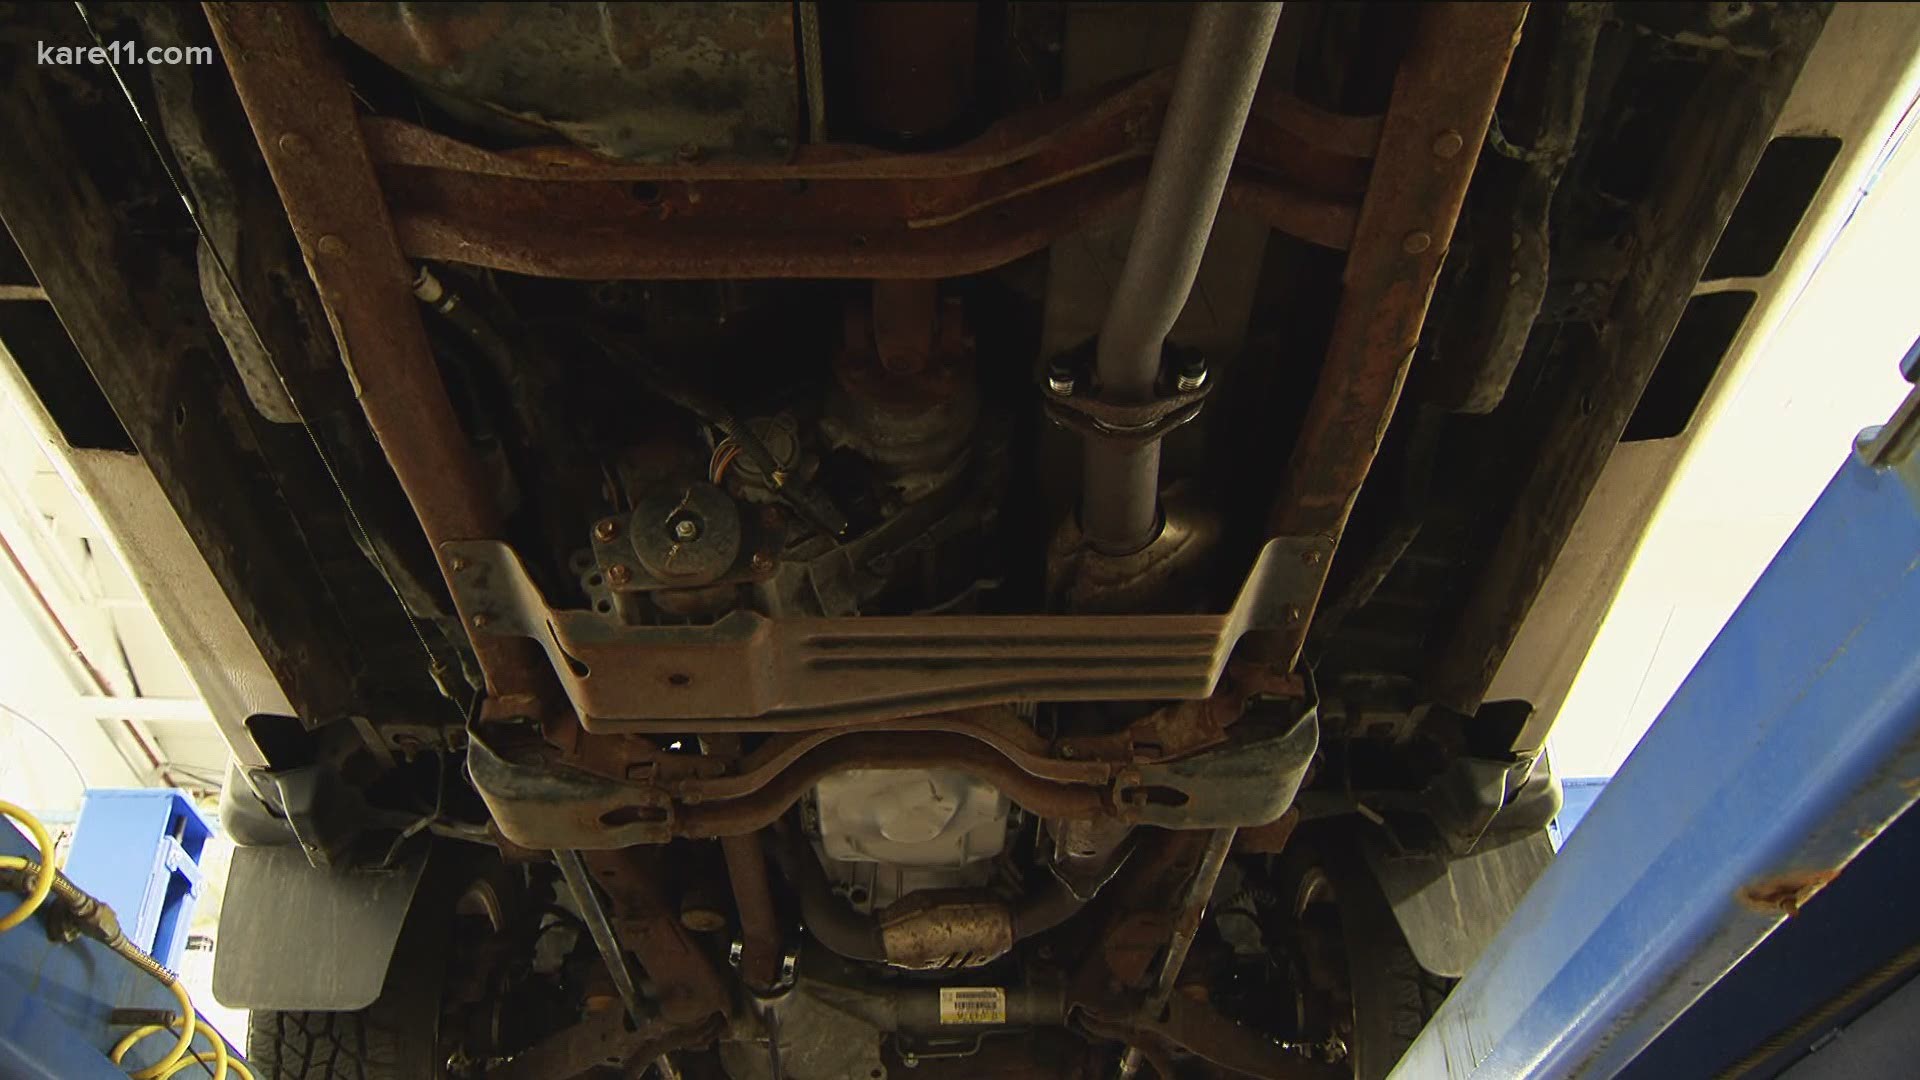 The St. Paul Police Department is getting creative in their attempt to crack down on catalytic converter thefts